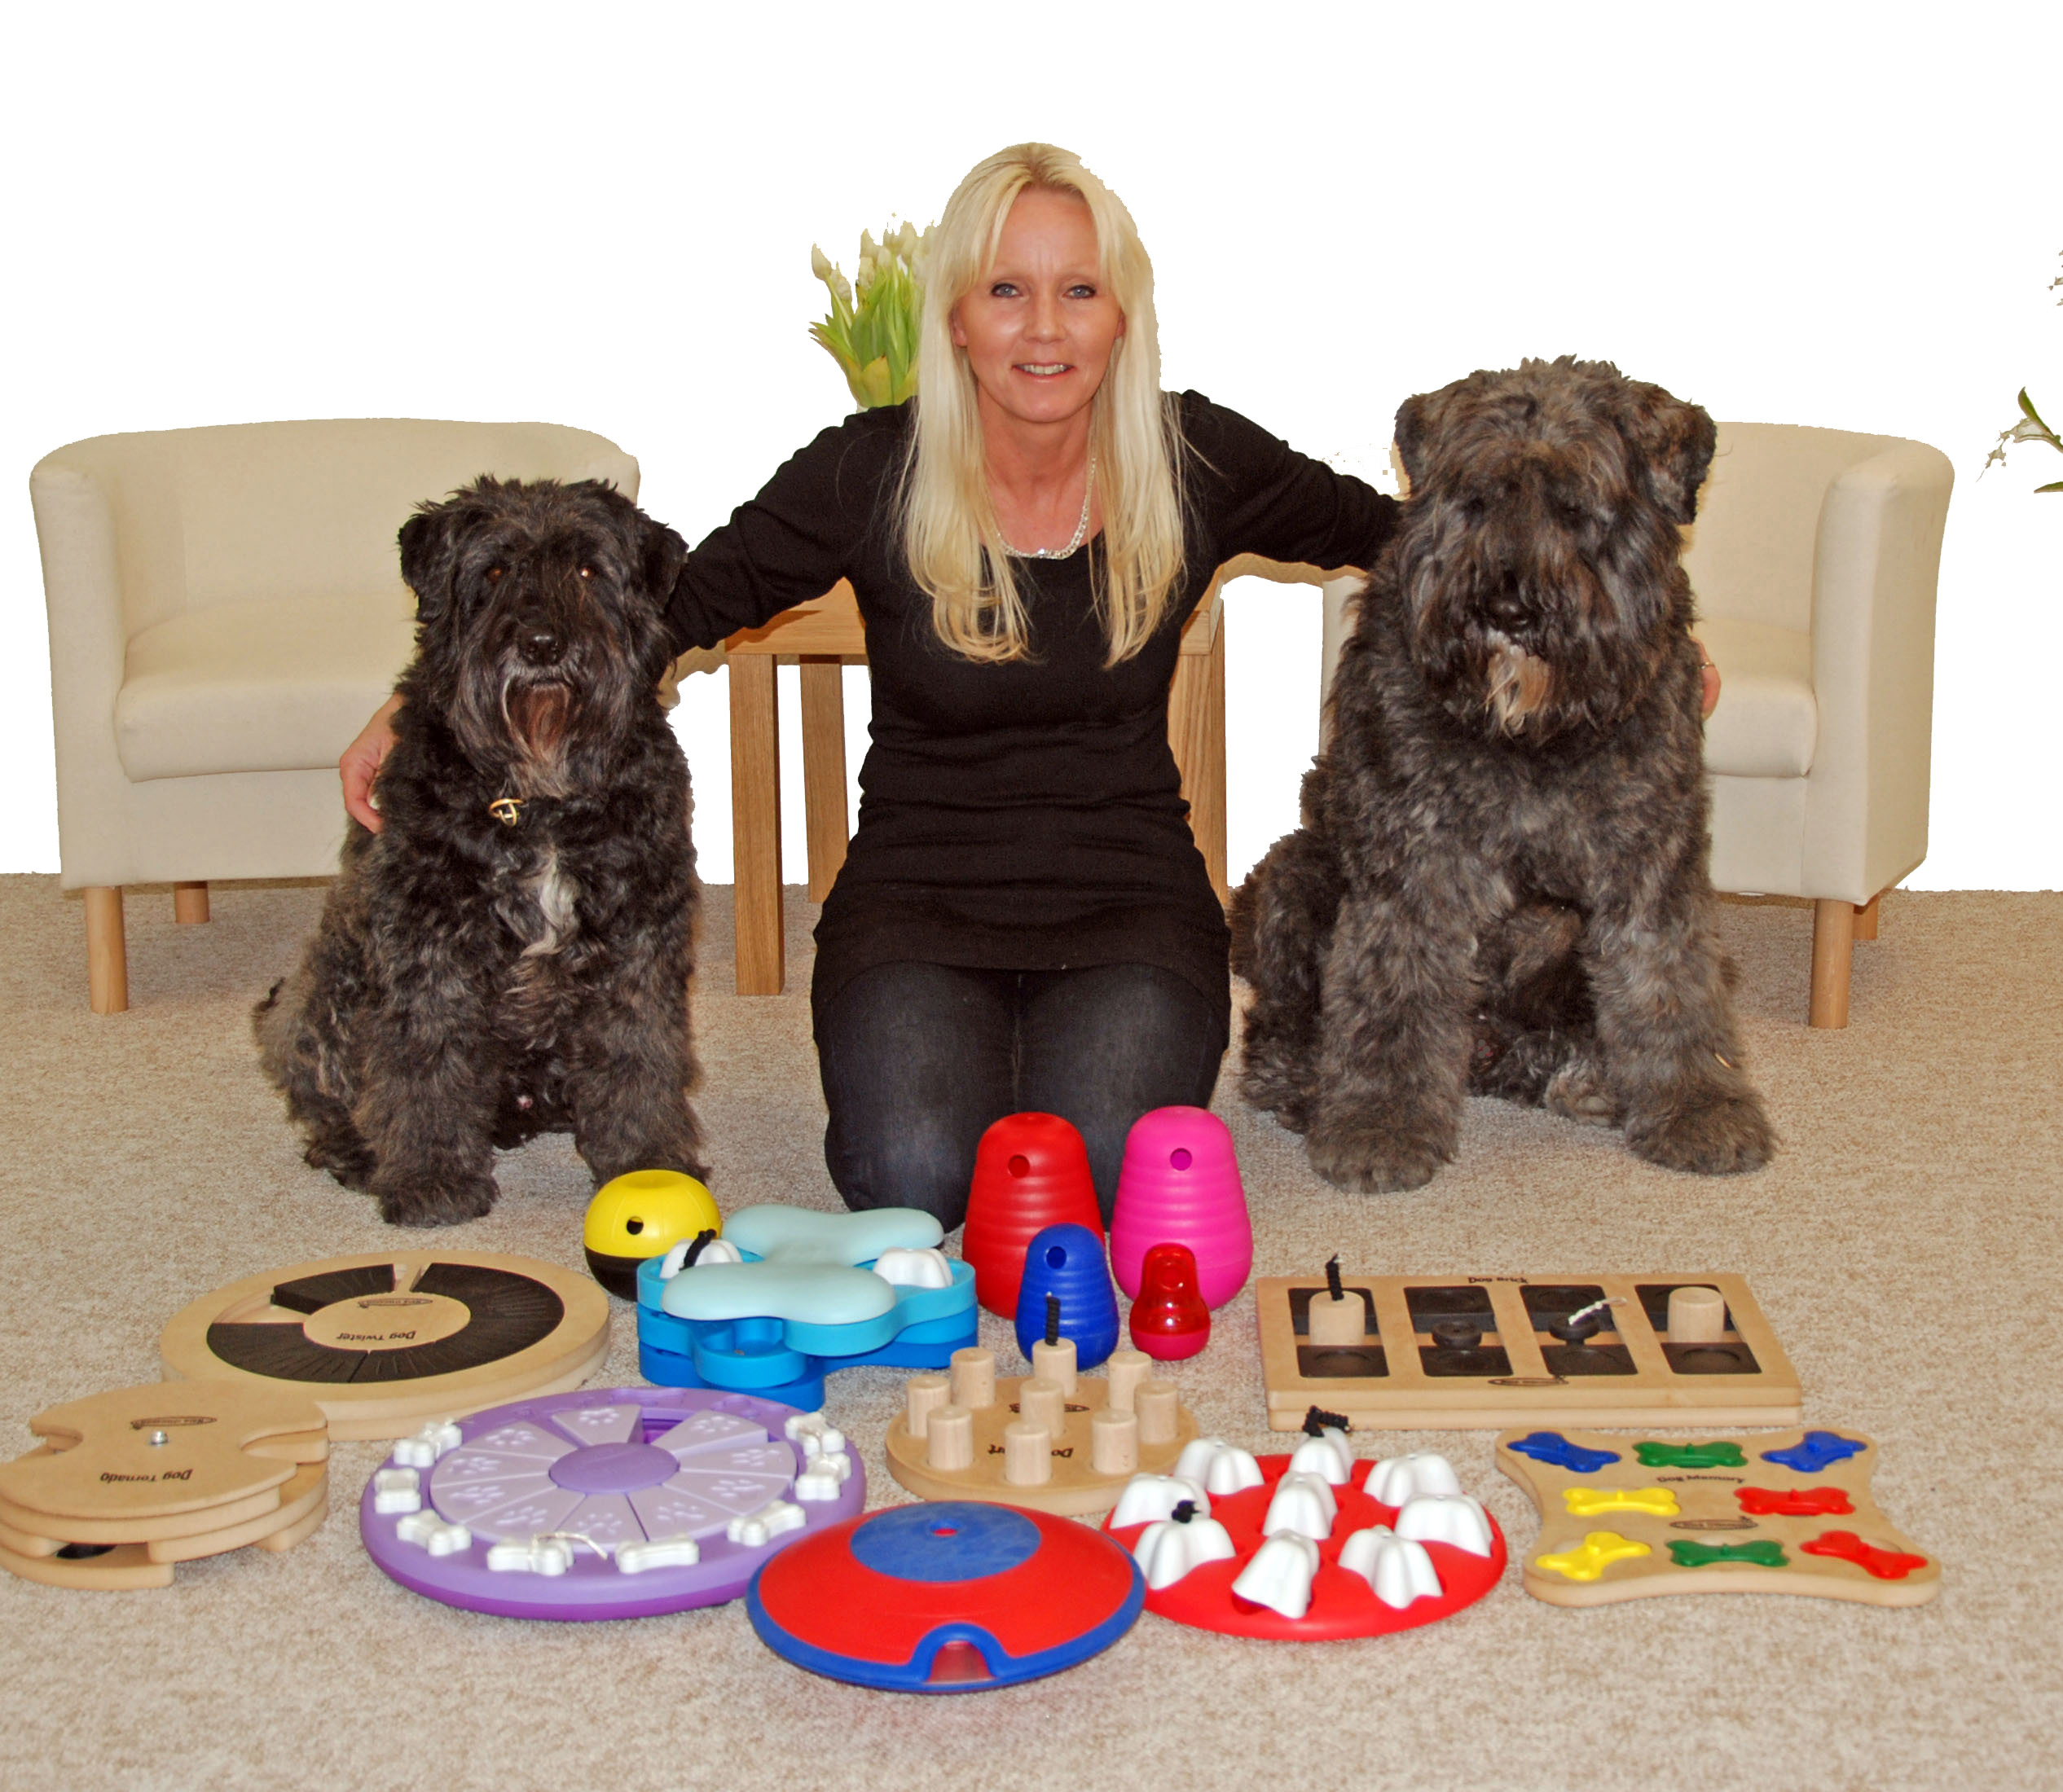 Nina Ottosson Twister Dog Toy Interactive Game for sale online